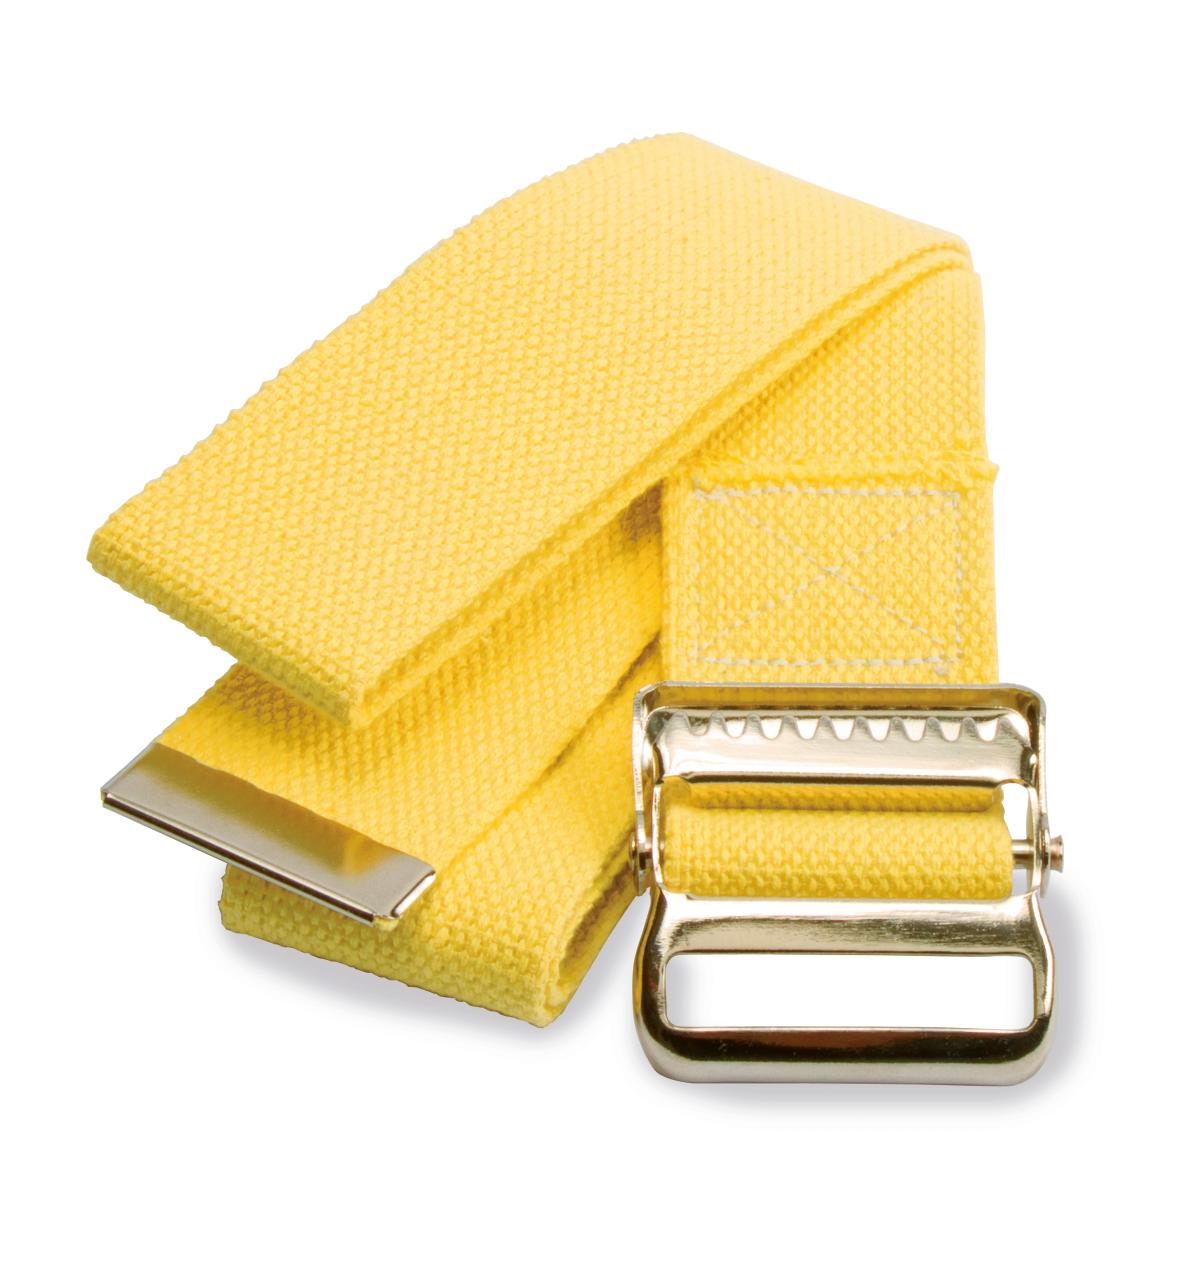 1 Each-Each / Yellow / Metal Buckle Patient Safety & Mobility - MEDLINE - Wasatch Medical Supply